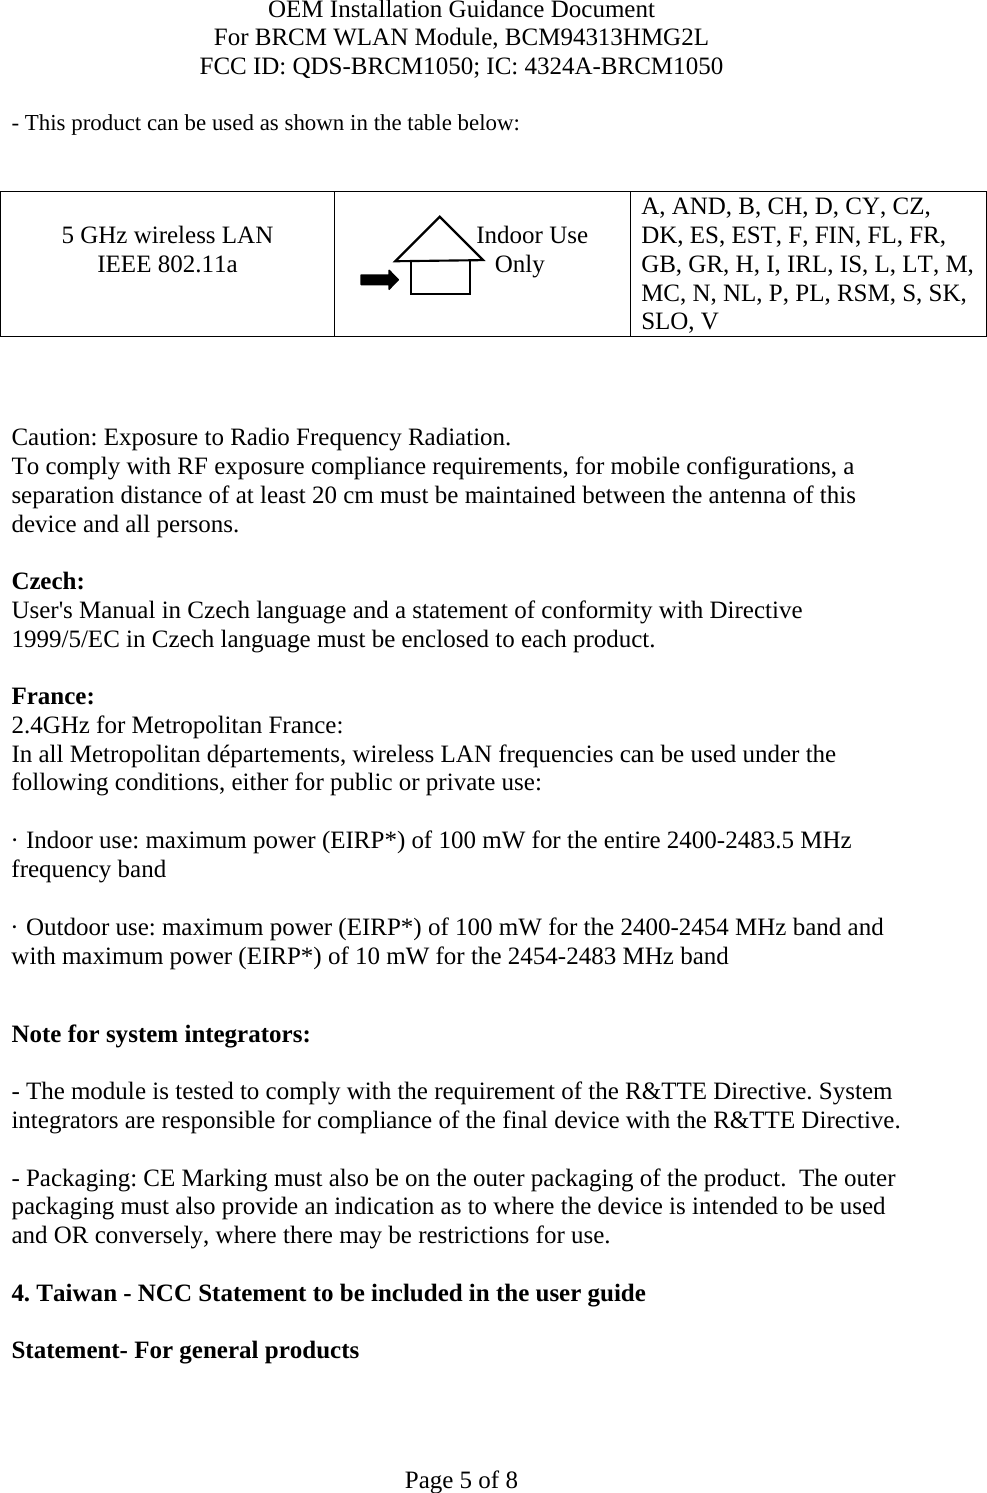 OEM Installation Guidance Document For BRCM WLAN Module, BCM94313HMG2L FCC ID: QDS-BRCM1050; IC: 4324A-BRCM1050  Page 5 of 8 - This product can be used as shown in the table below:   5 GHz wireless LAN IEEE 802.11a                  Indoor Use             Only  A, AND, B, CH, D, CY, CZ, DK, ES, EST, F, FIN, FL, FR, GB, GR, H, I, IRL, IS, L, LT, M, MC, N, NL, P, PL, RSM, S, SK, SLO, V    Caution: Exposure to Radio Frequency Radiation.   To comply with RF exposure compliance requirements, for mobile configurations, a separation distance of at least 20 cm must be maintained between the antenna of this device and all persons.  Czech:  User&apos;s Manual in Czech language and a statement of conformity with Directive 1999/5/EC in Czech language must be enclosed to each product.   France: 2.4GHz for Metropolitan France:   In all Metropolitan départements, wireless LAN frequencies can be used under the following conditions, either for public or private use:  · Indoor use: maximum power (EIRP*) of 100 mW for the entire 2400-2483.5 MHz frequency band · Outdoor use: maximum power (EIRP*) of 100 mW for the 2400-2454 MHz band and with maximum power (EIRP*) of 10 mW for the 2454-2483 MHz band  Note for system integrators:   - The module is tested to comply with the requirement of the R&amp;TTE Directive. System integrators are responsible for compliance of the final device with the R&amp;TTE Directive.   - Packaging: CE Marking must also be on the outer packaging of the product.  The outer packaging must also provide an indication as to where the device is intended to be used and OR conversely, where there may be restrictions for use.   4. Taiwan - NCC Statement to be included in the user guide  Statement- For general products  